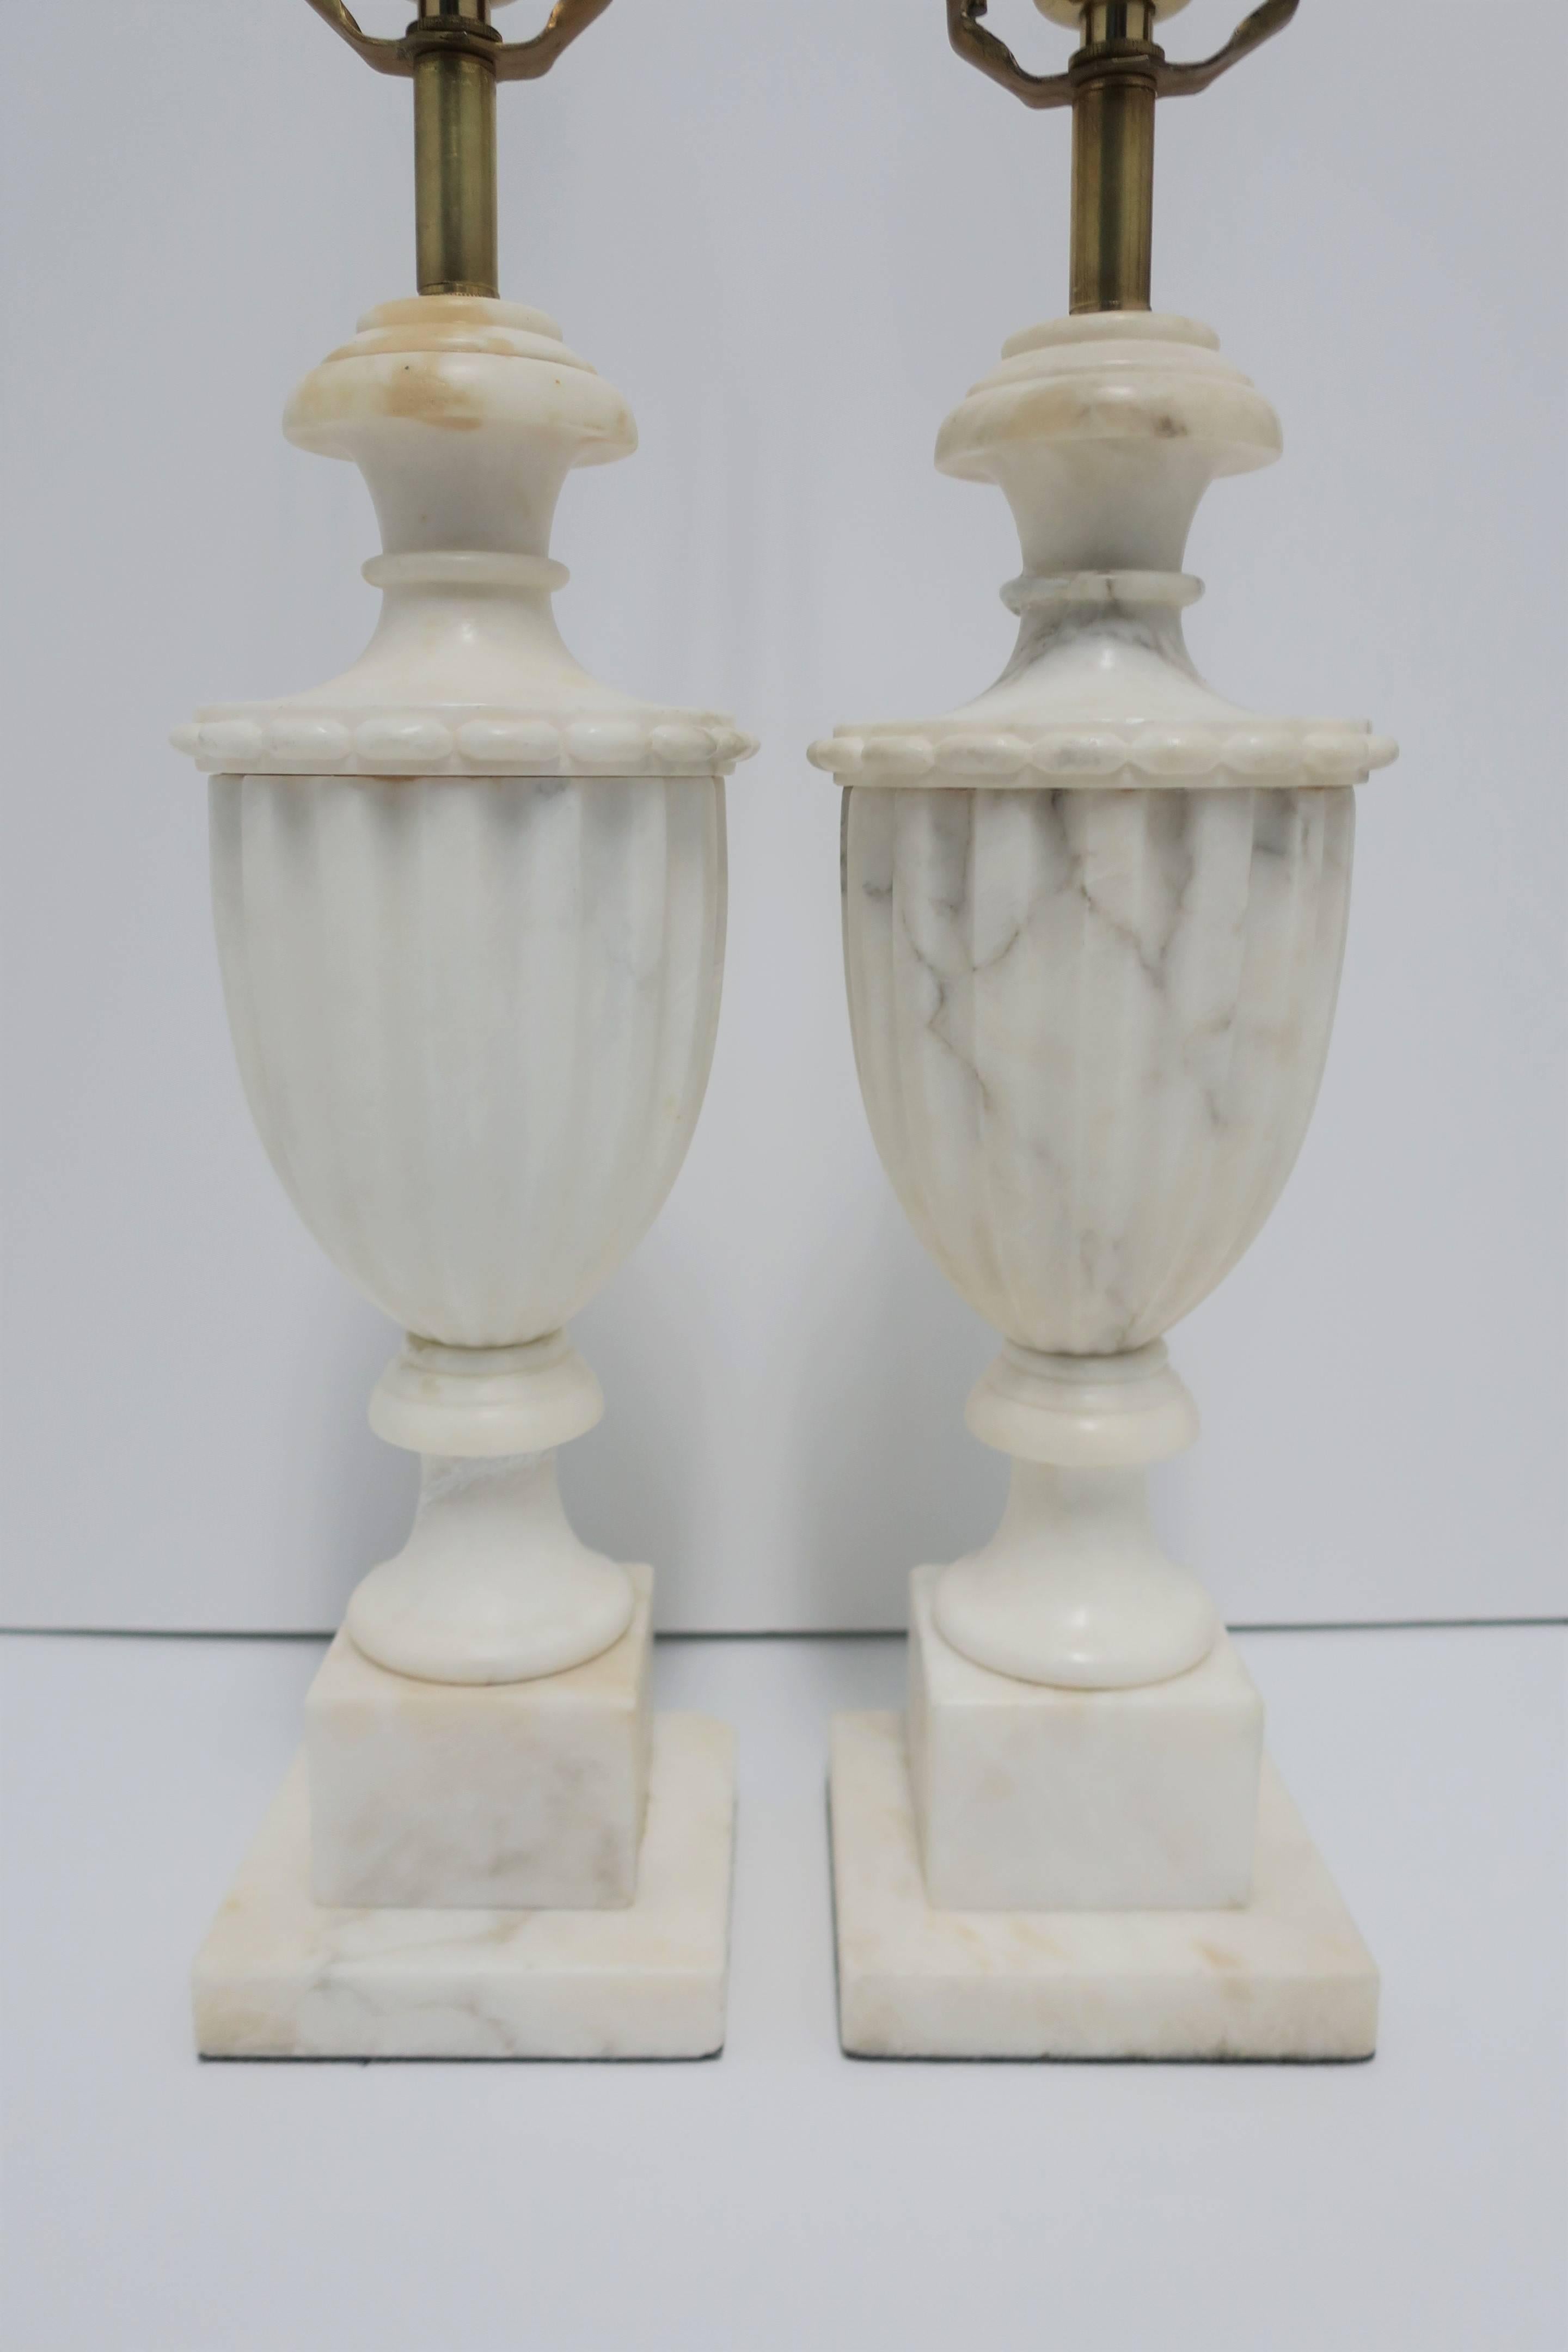 Carved Pair of Italian Classical Roman White Marble Urn Table Lamps